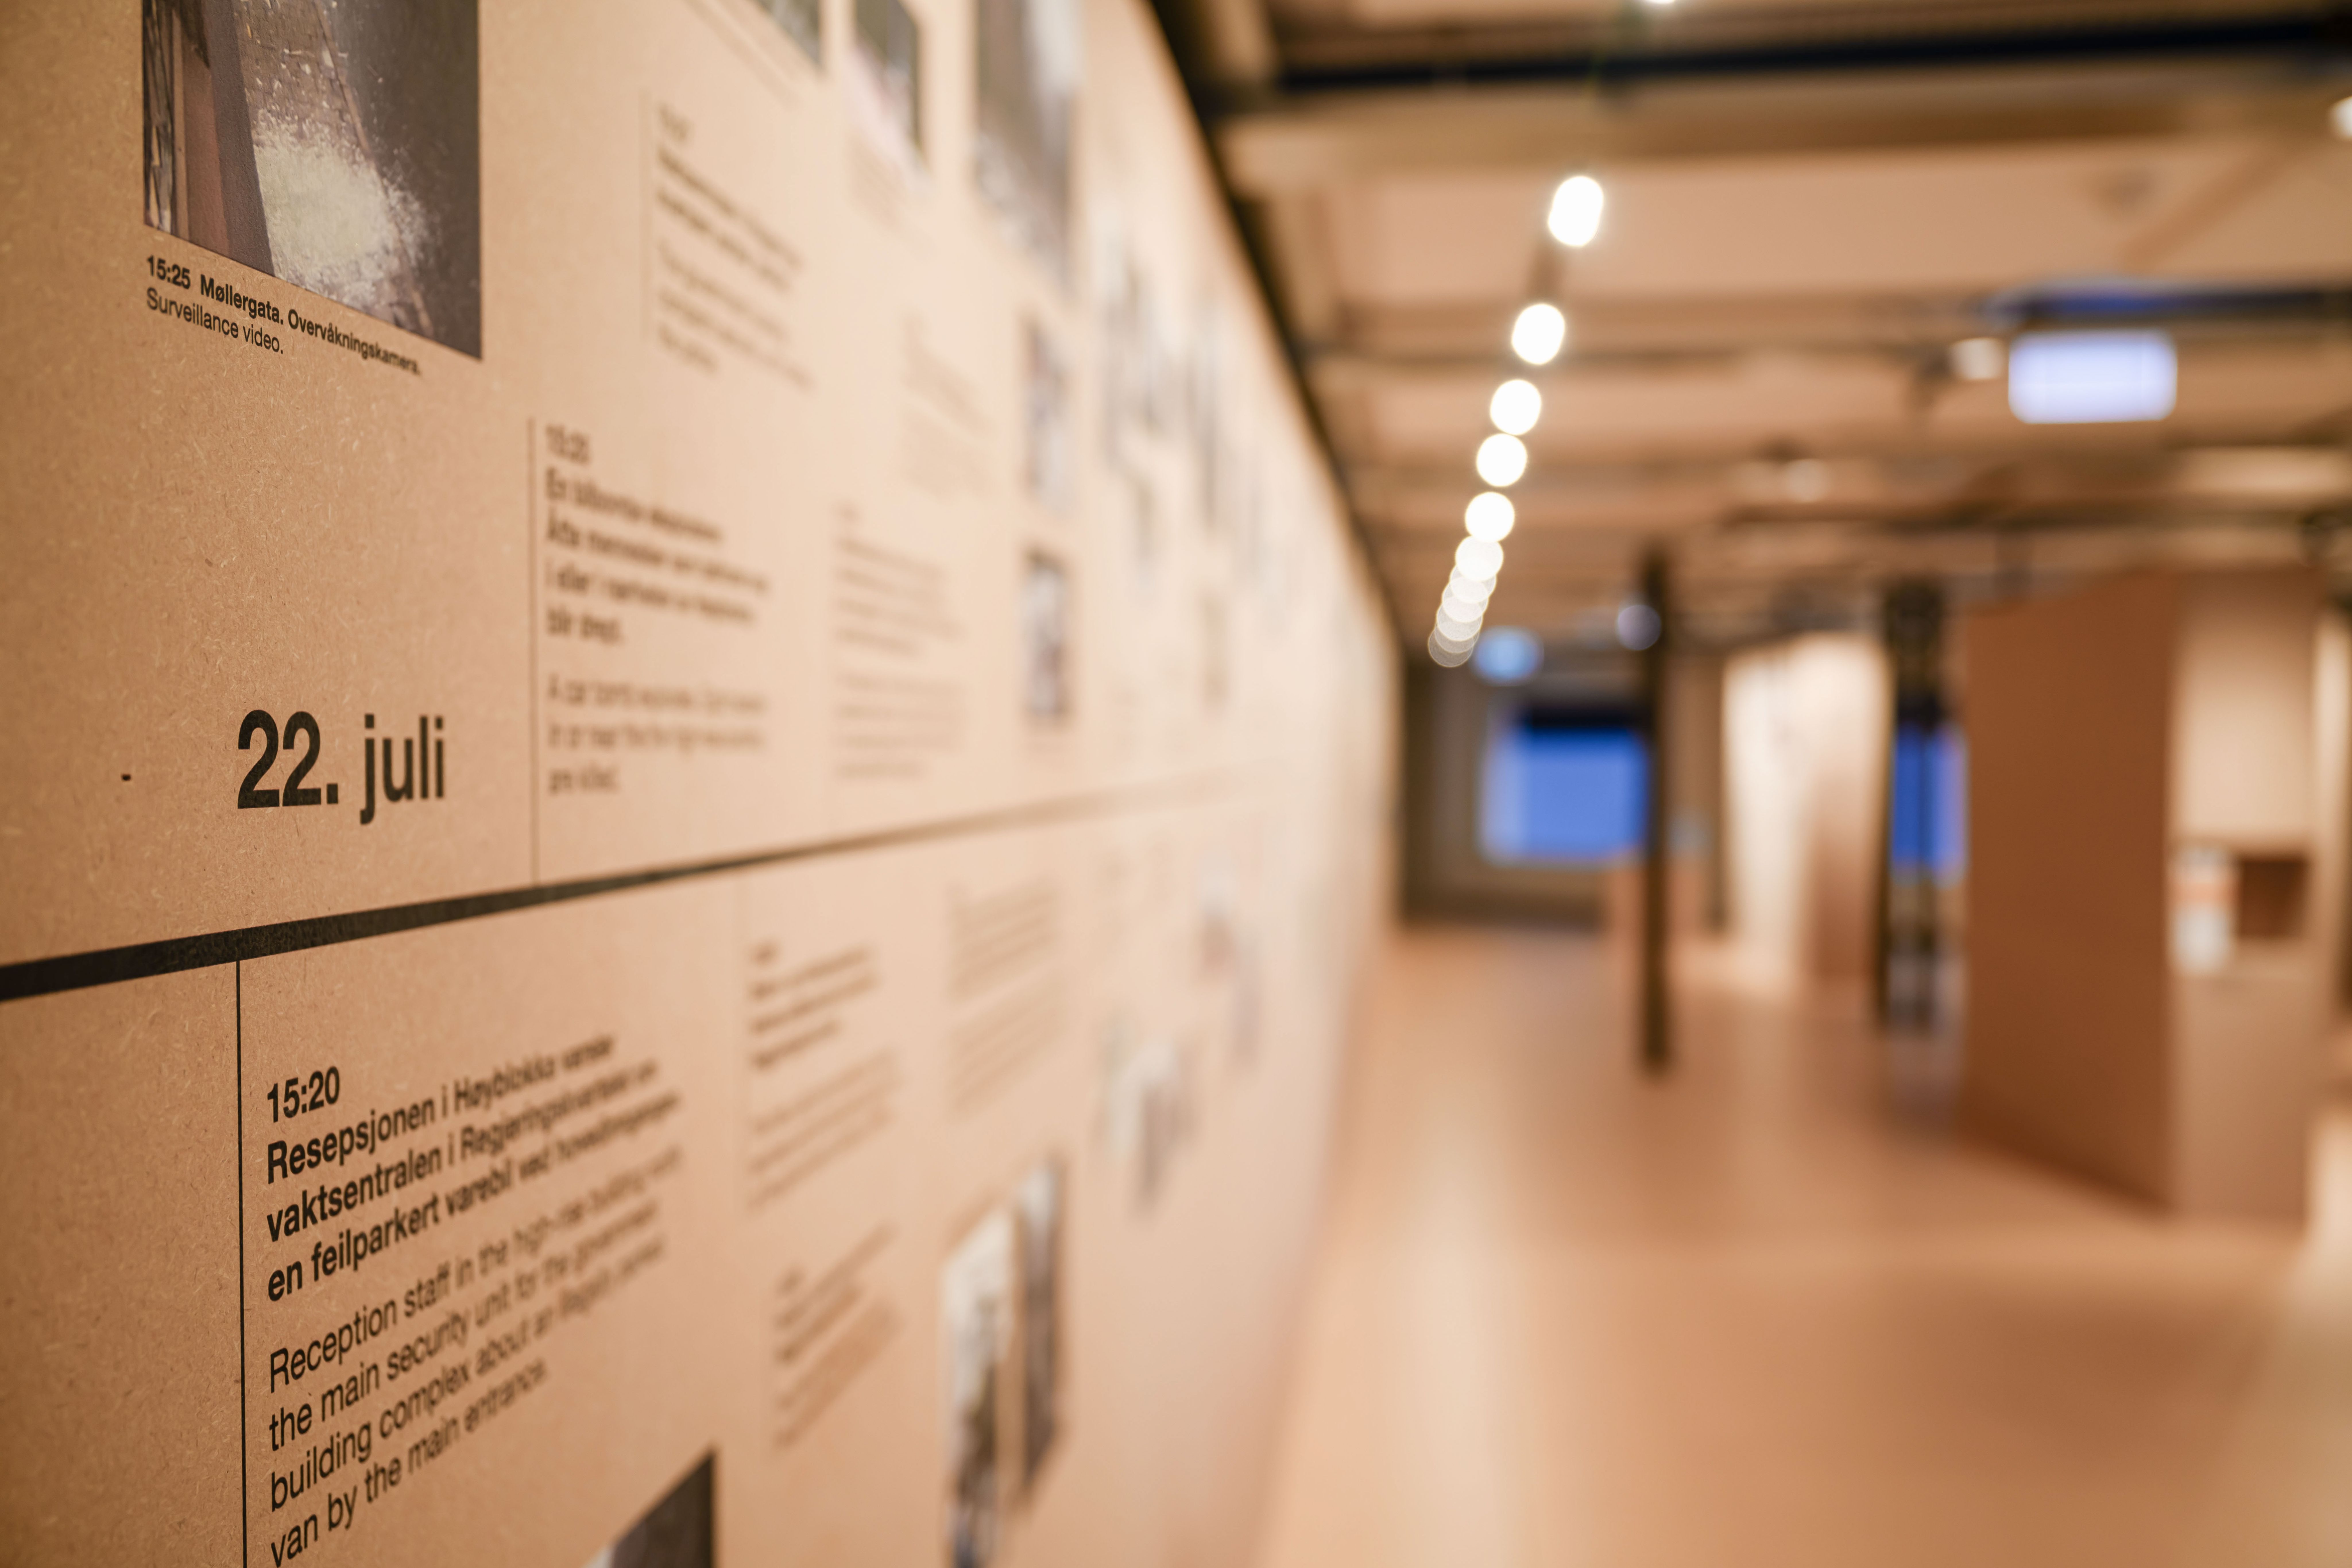 An exhibition wall with a timeline that is only in focus on the foreground, where one can read "22 July".